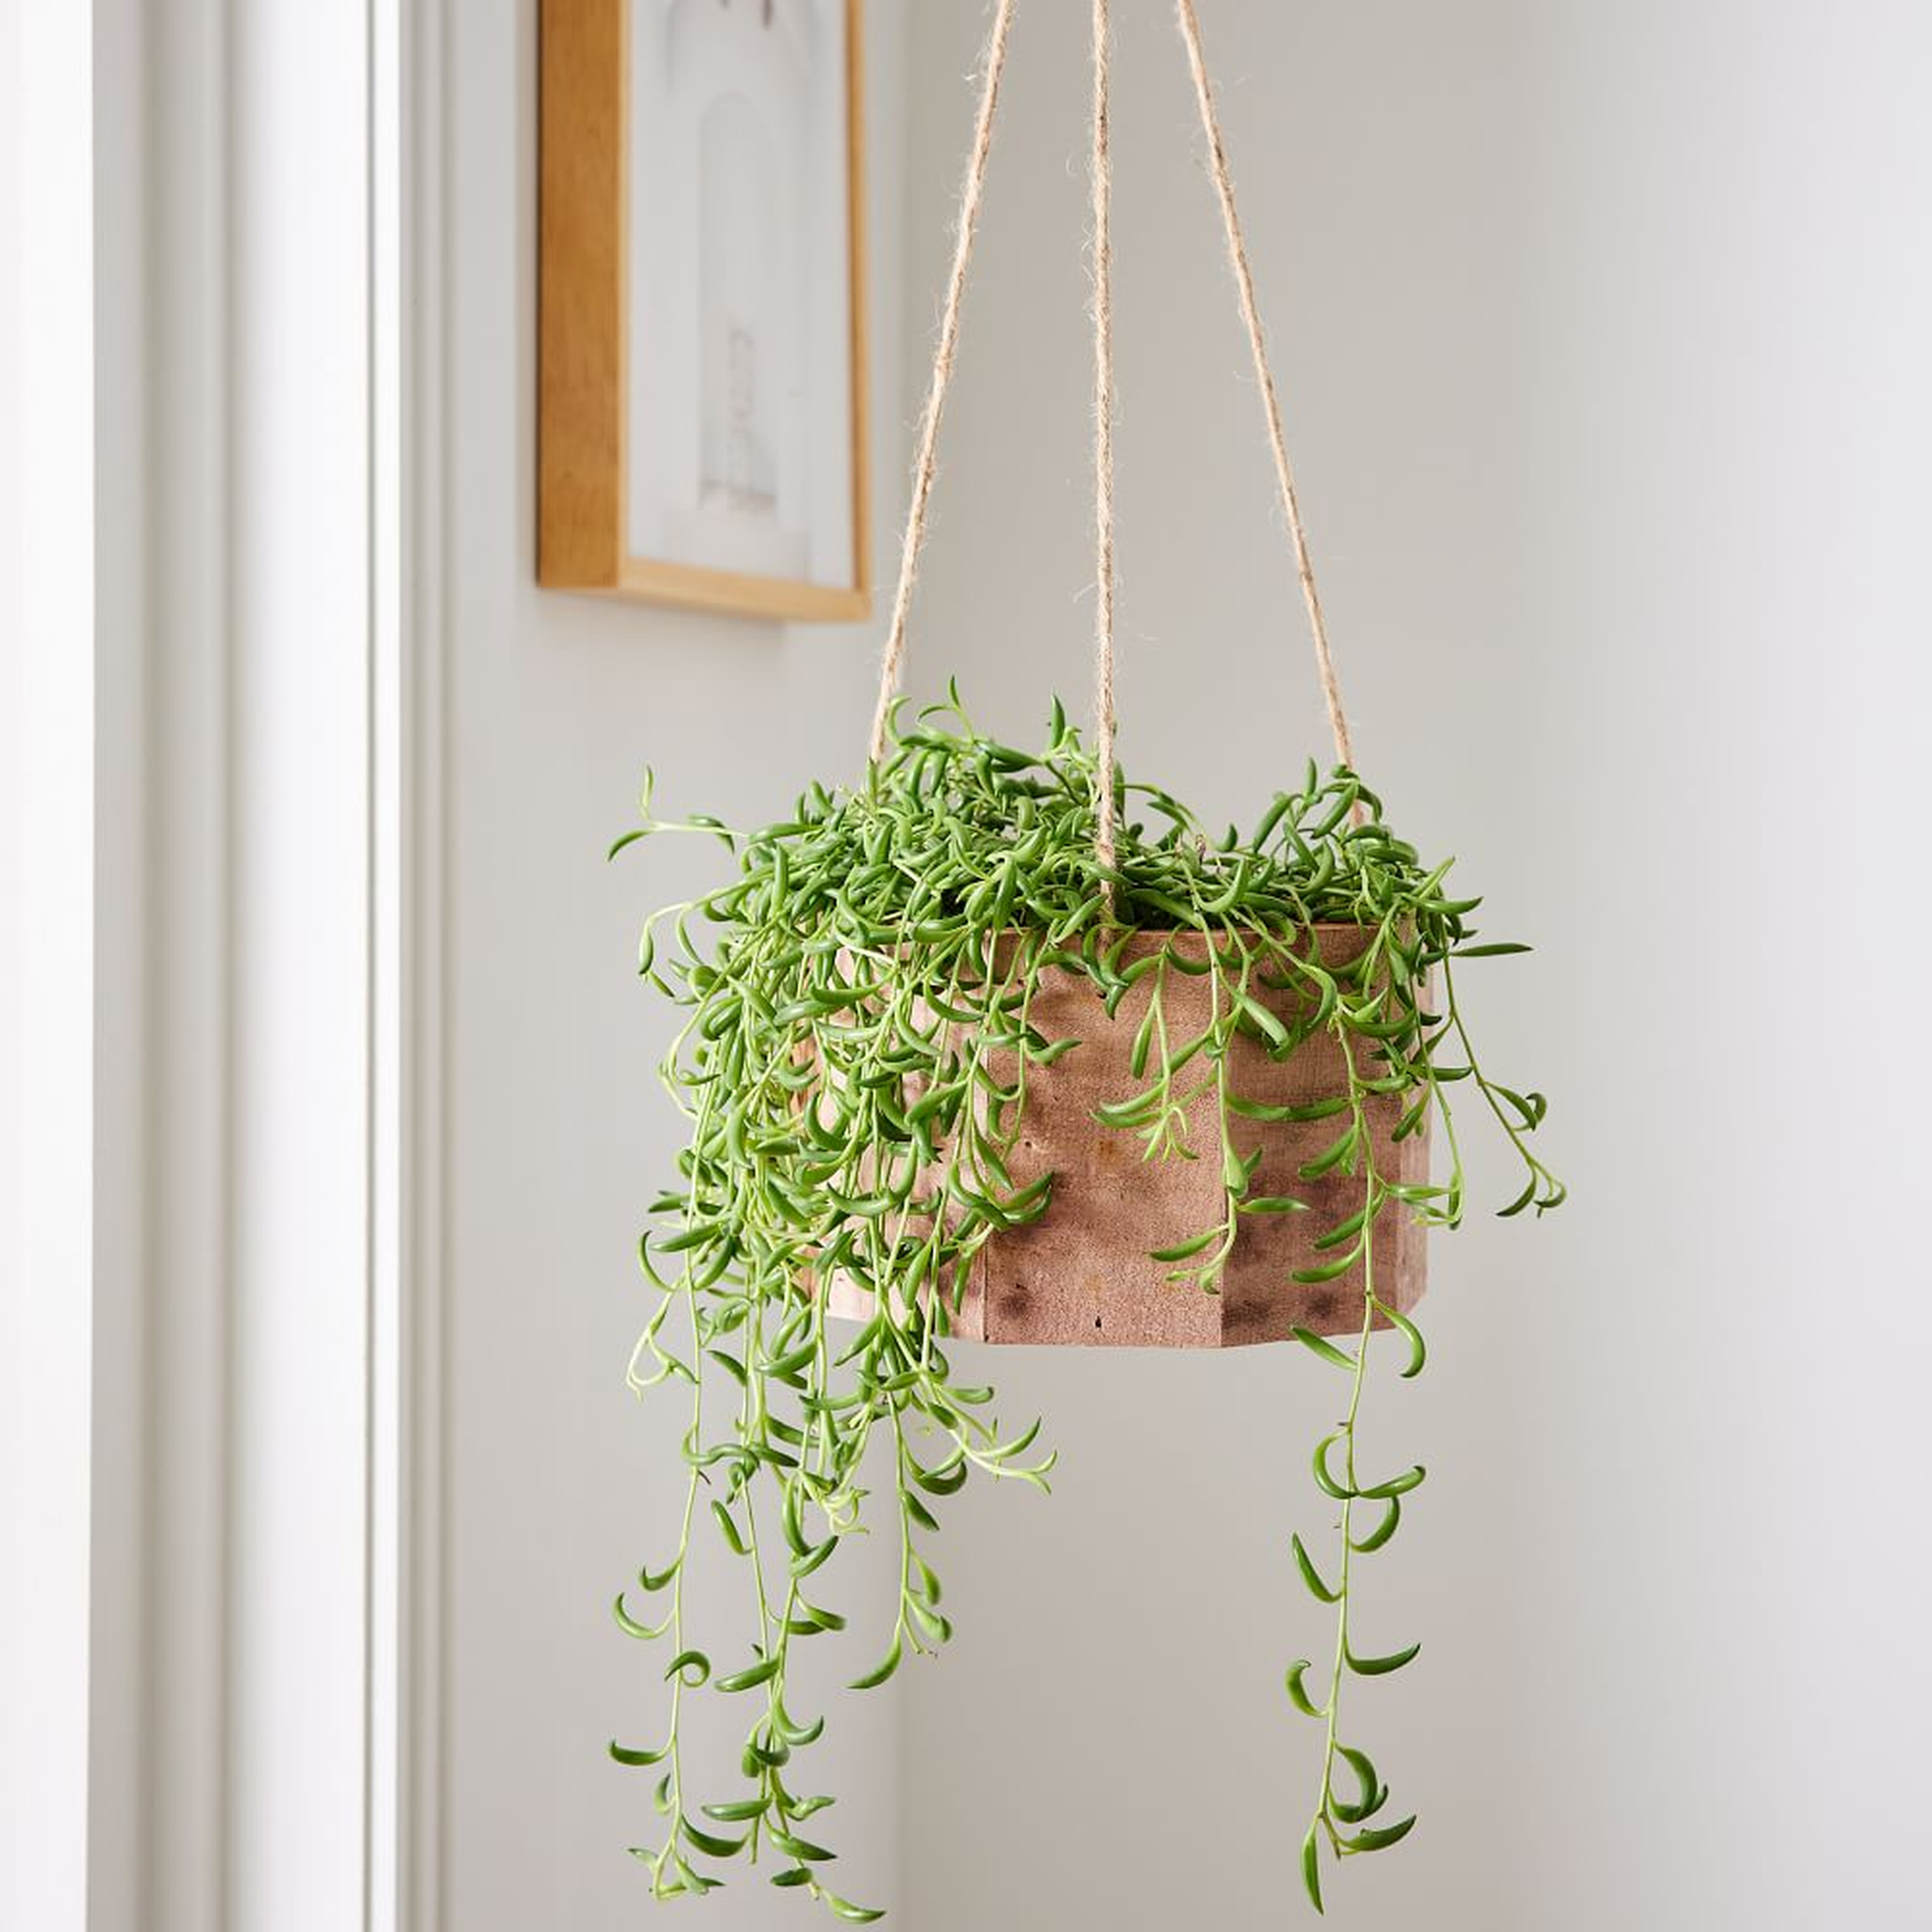 6in Succulent String of Bananas in Hanging Wood Planter - West Elm